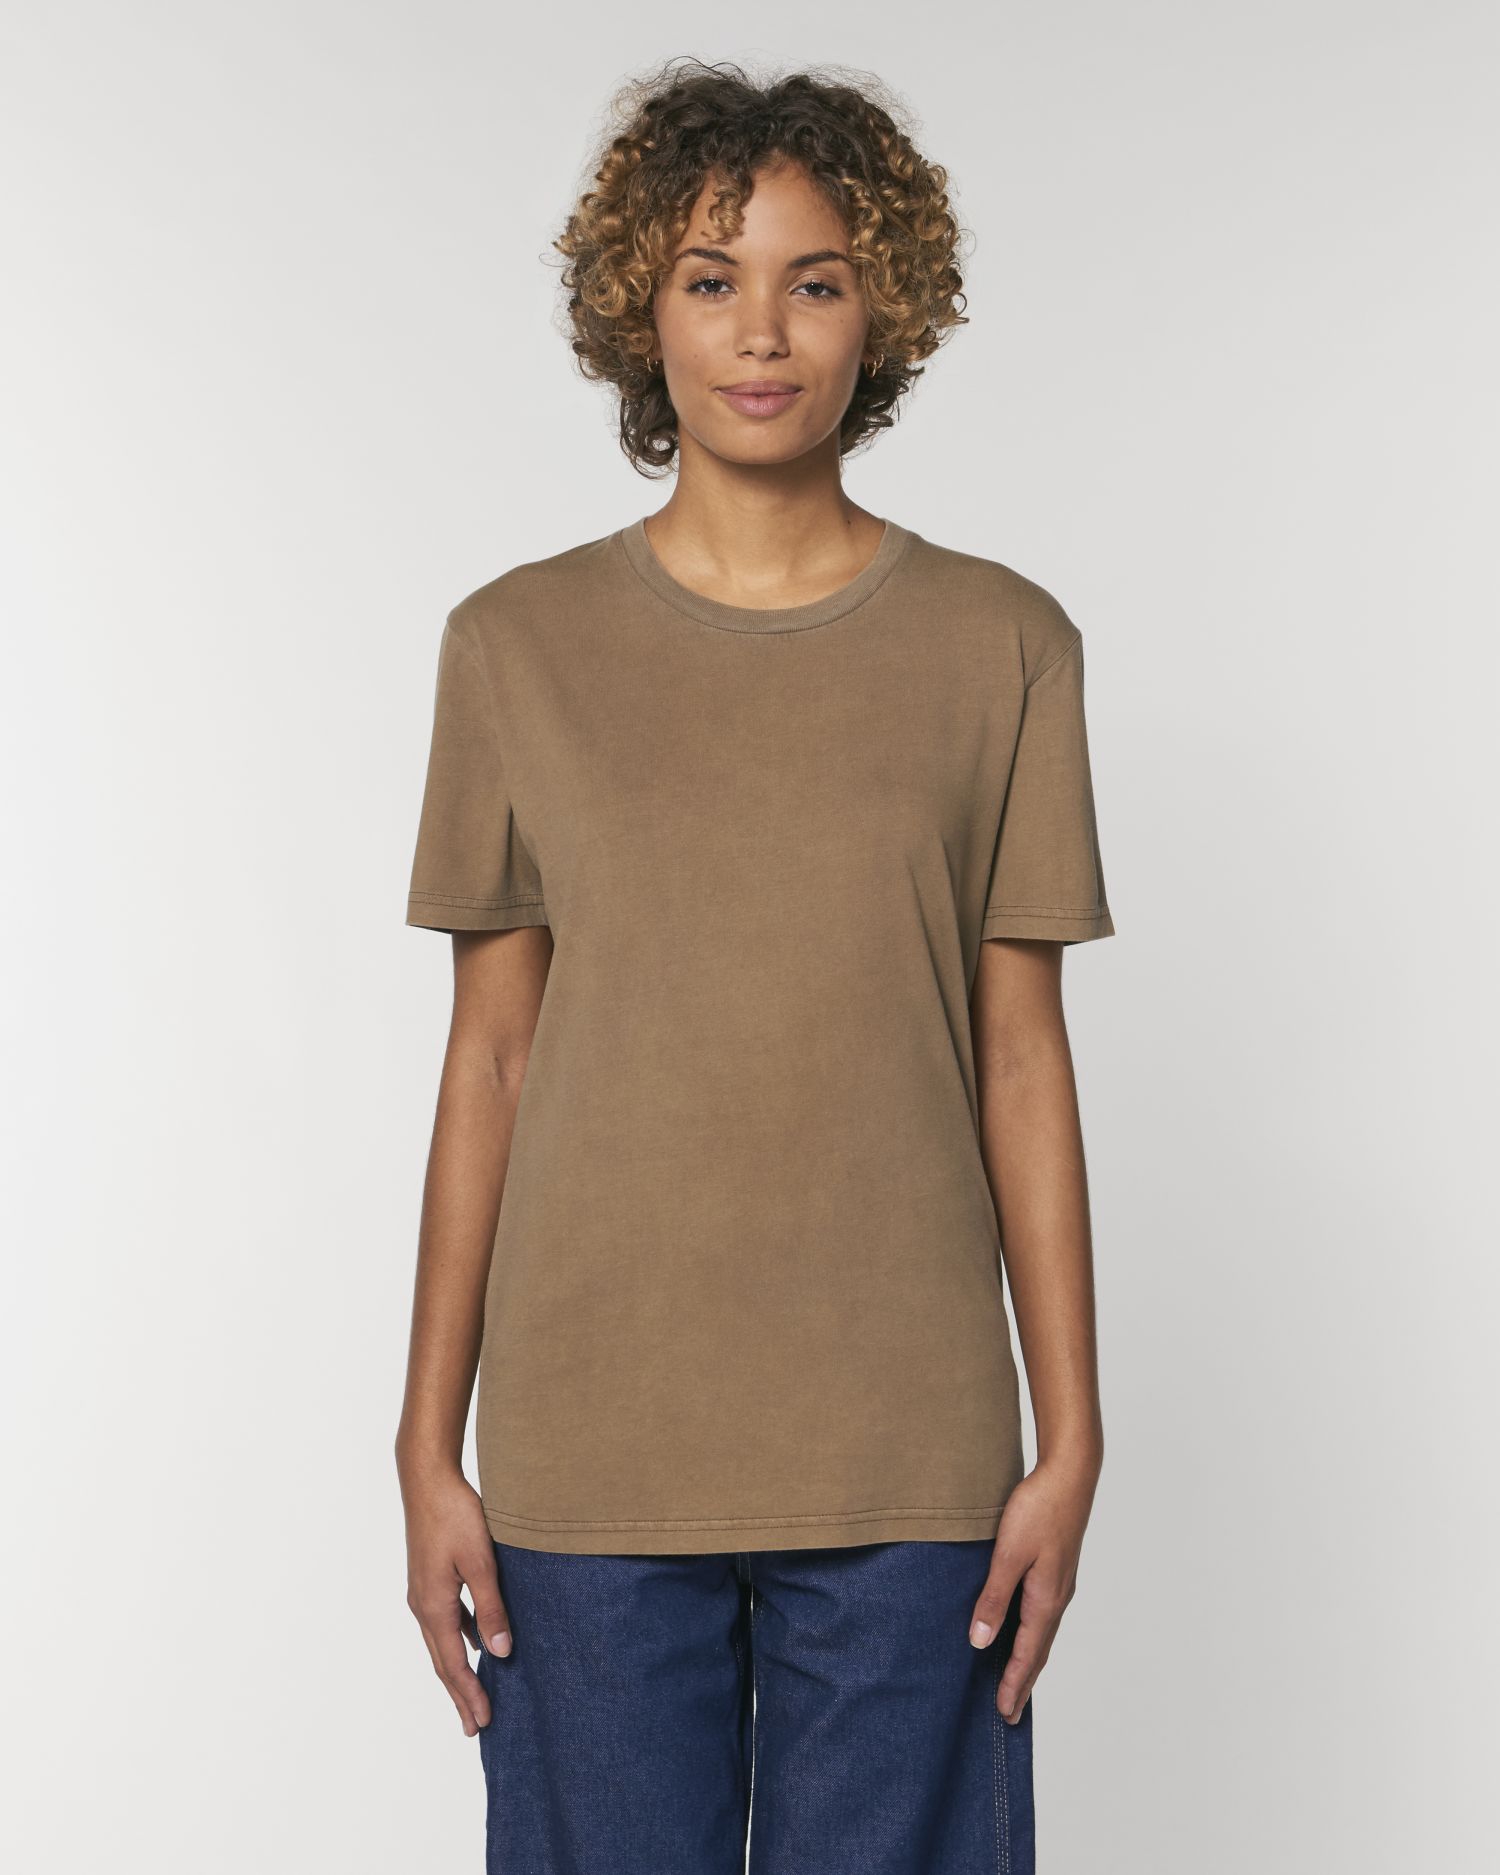 T-Shirt Creator Vintage in Farbe G. Dyed Caramel